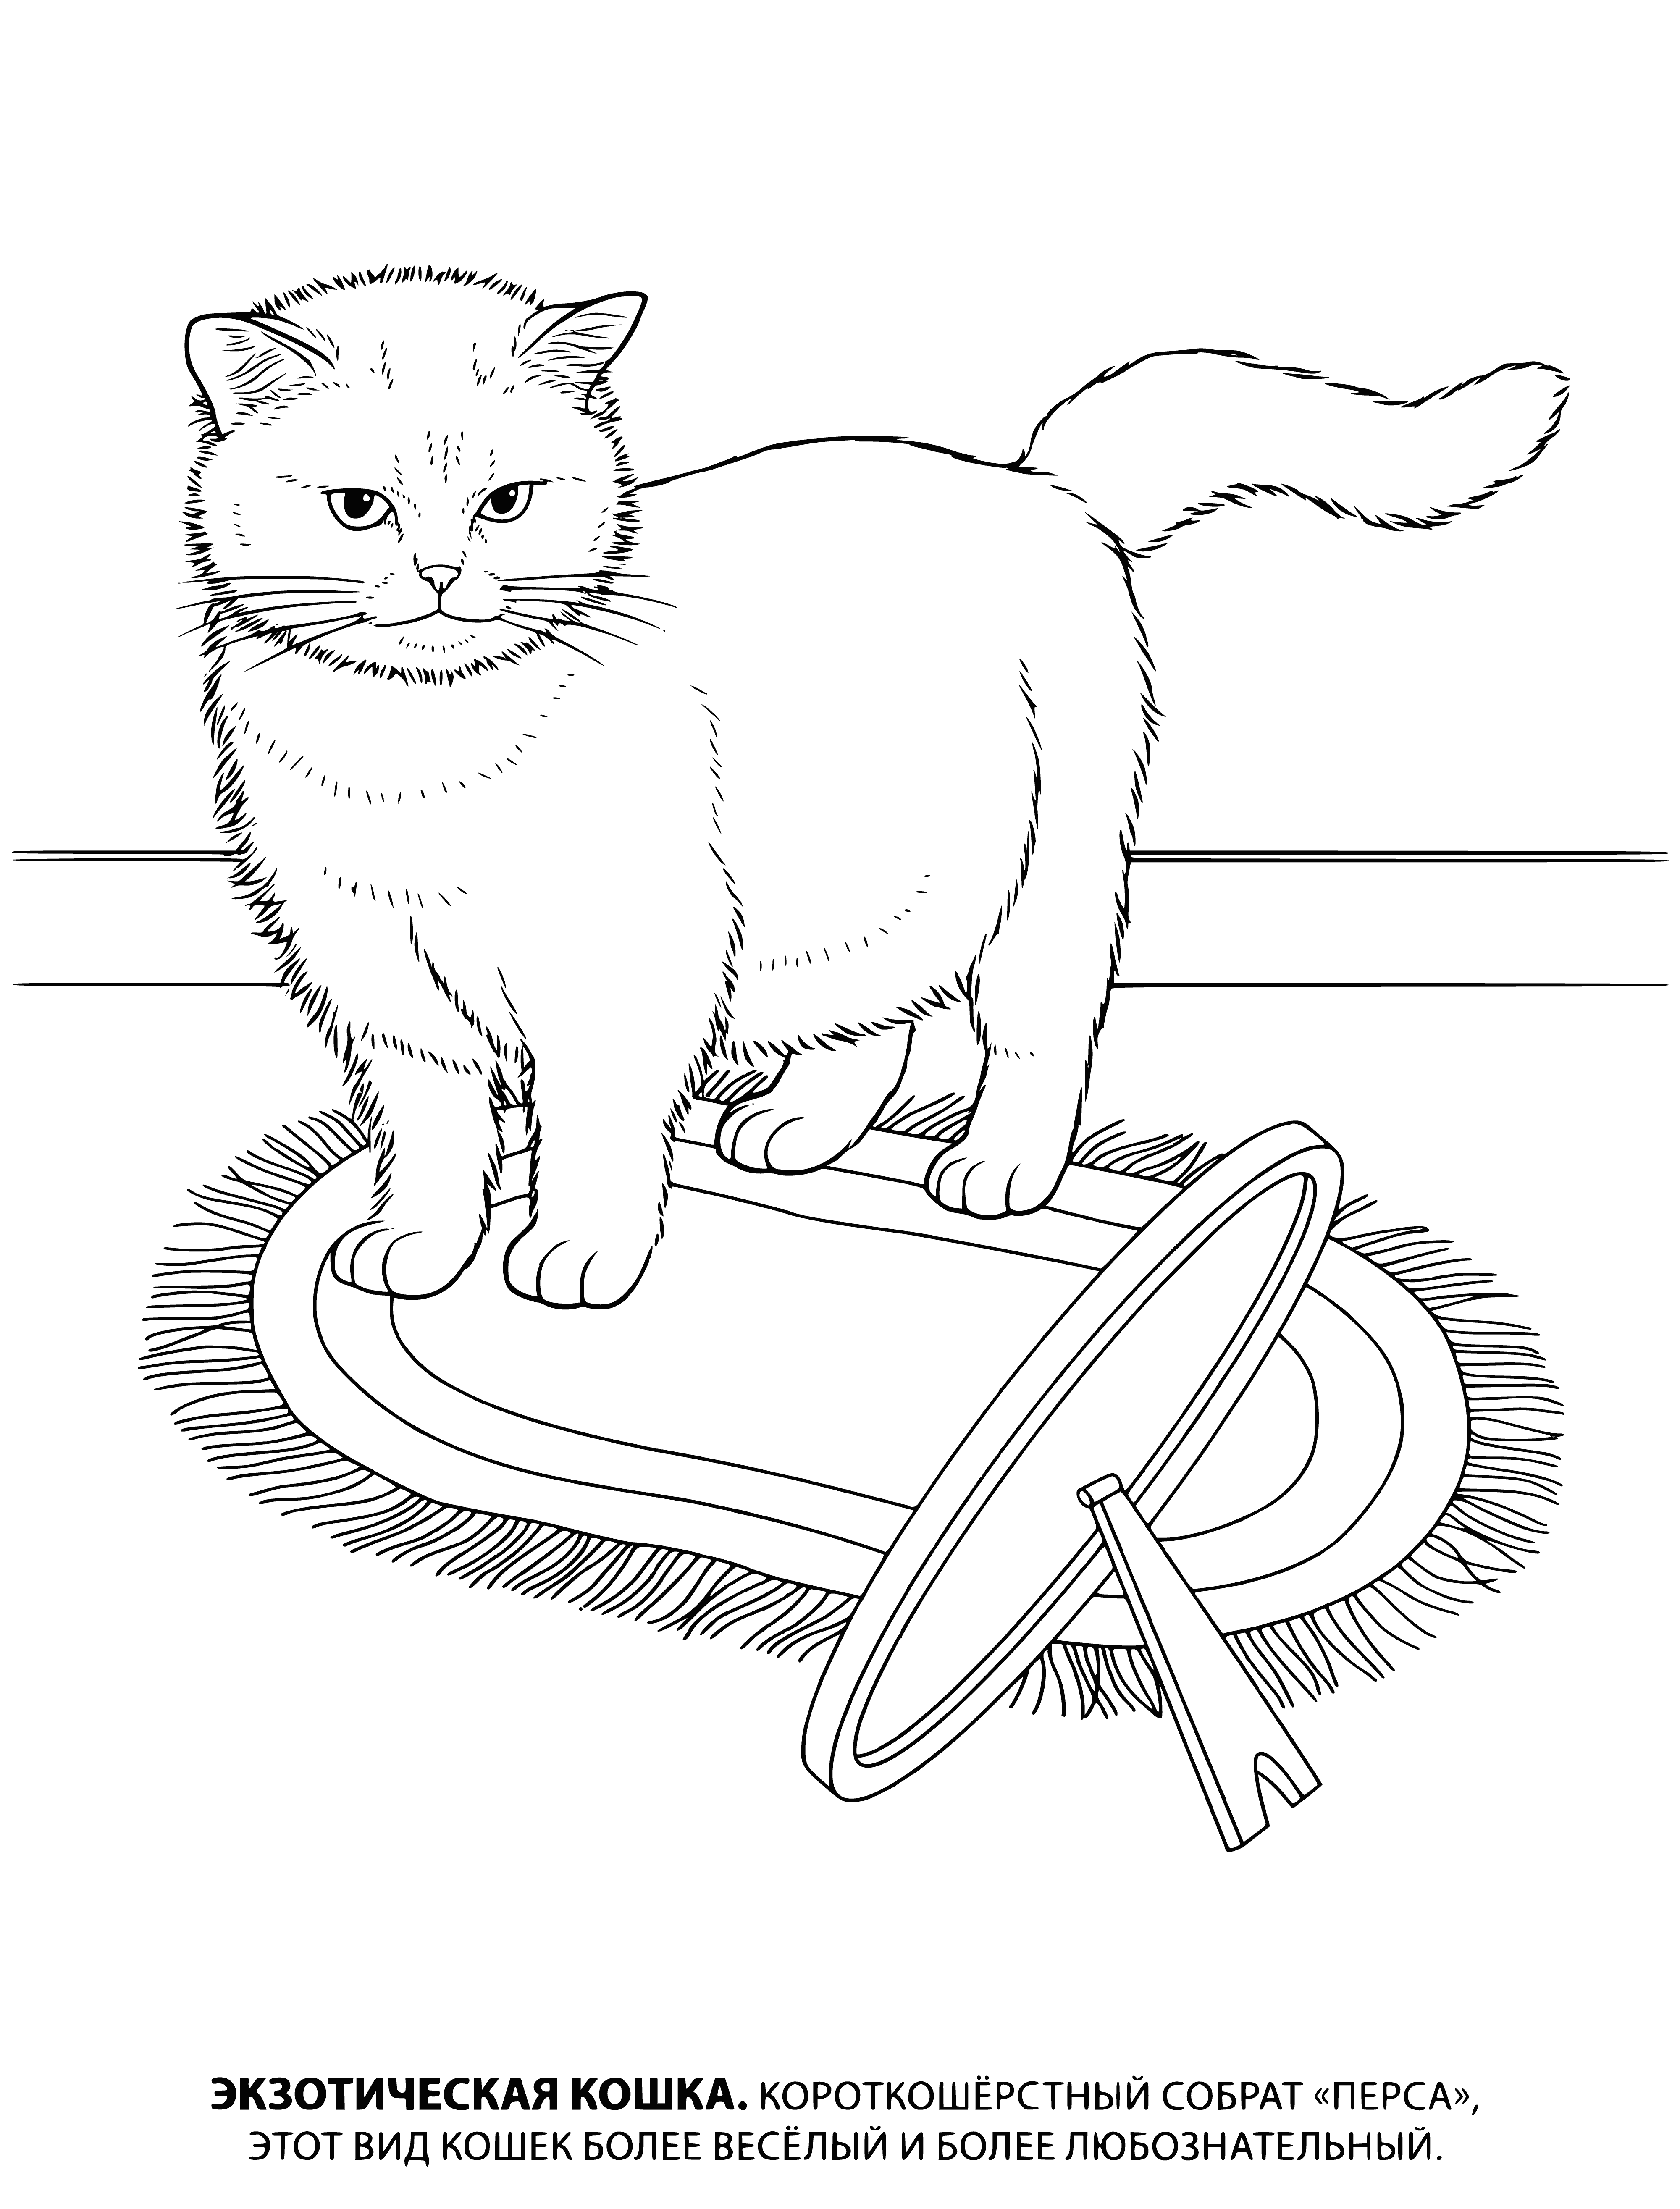 coloring page: Black, brown and white tabby cat with yellow eyes and black ears & nose looks right. Long, black tail with white tip.